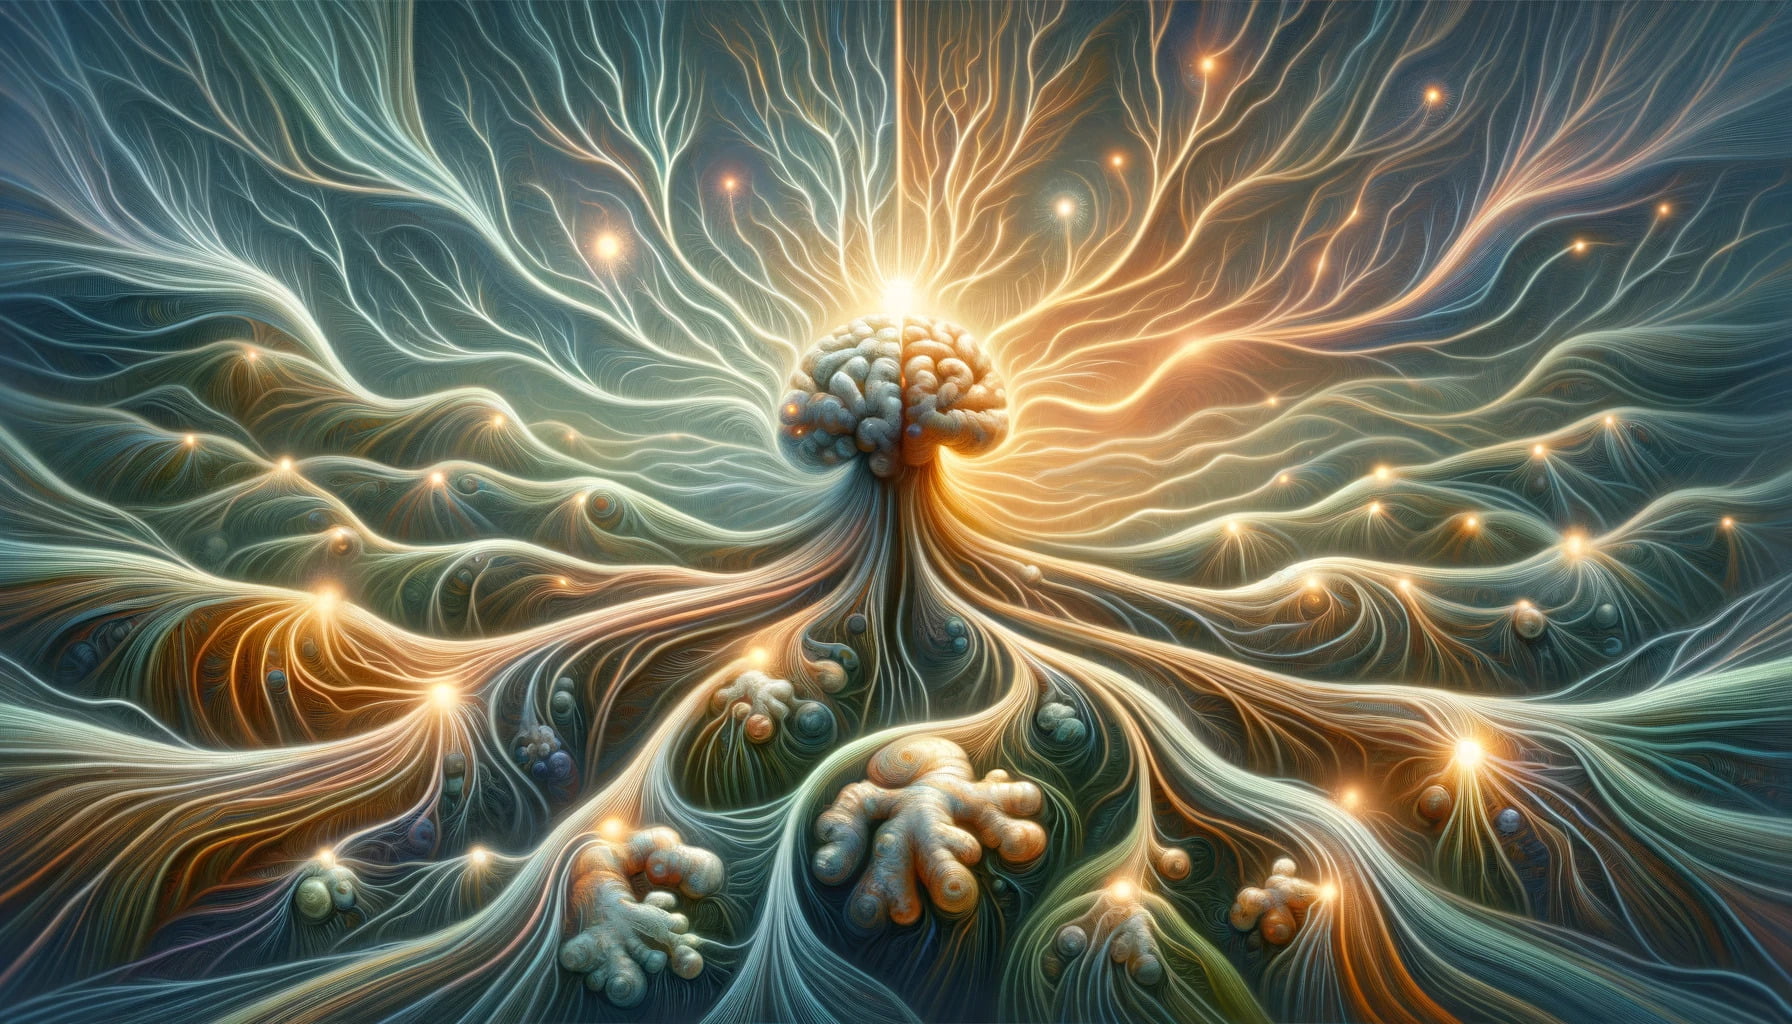 An artistic interpretation of neural connections being enhanced by the nootropic compound ginger. The neural connections are depicted as intricate